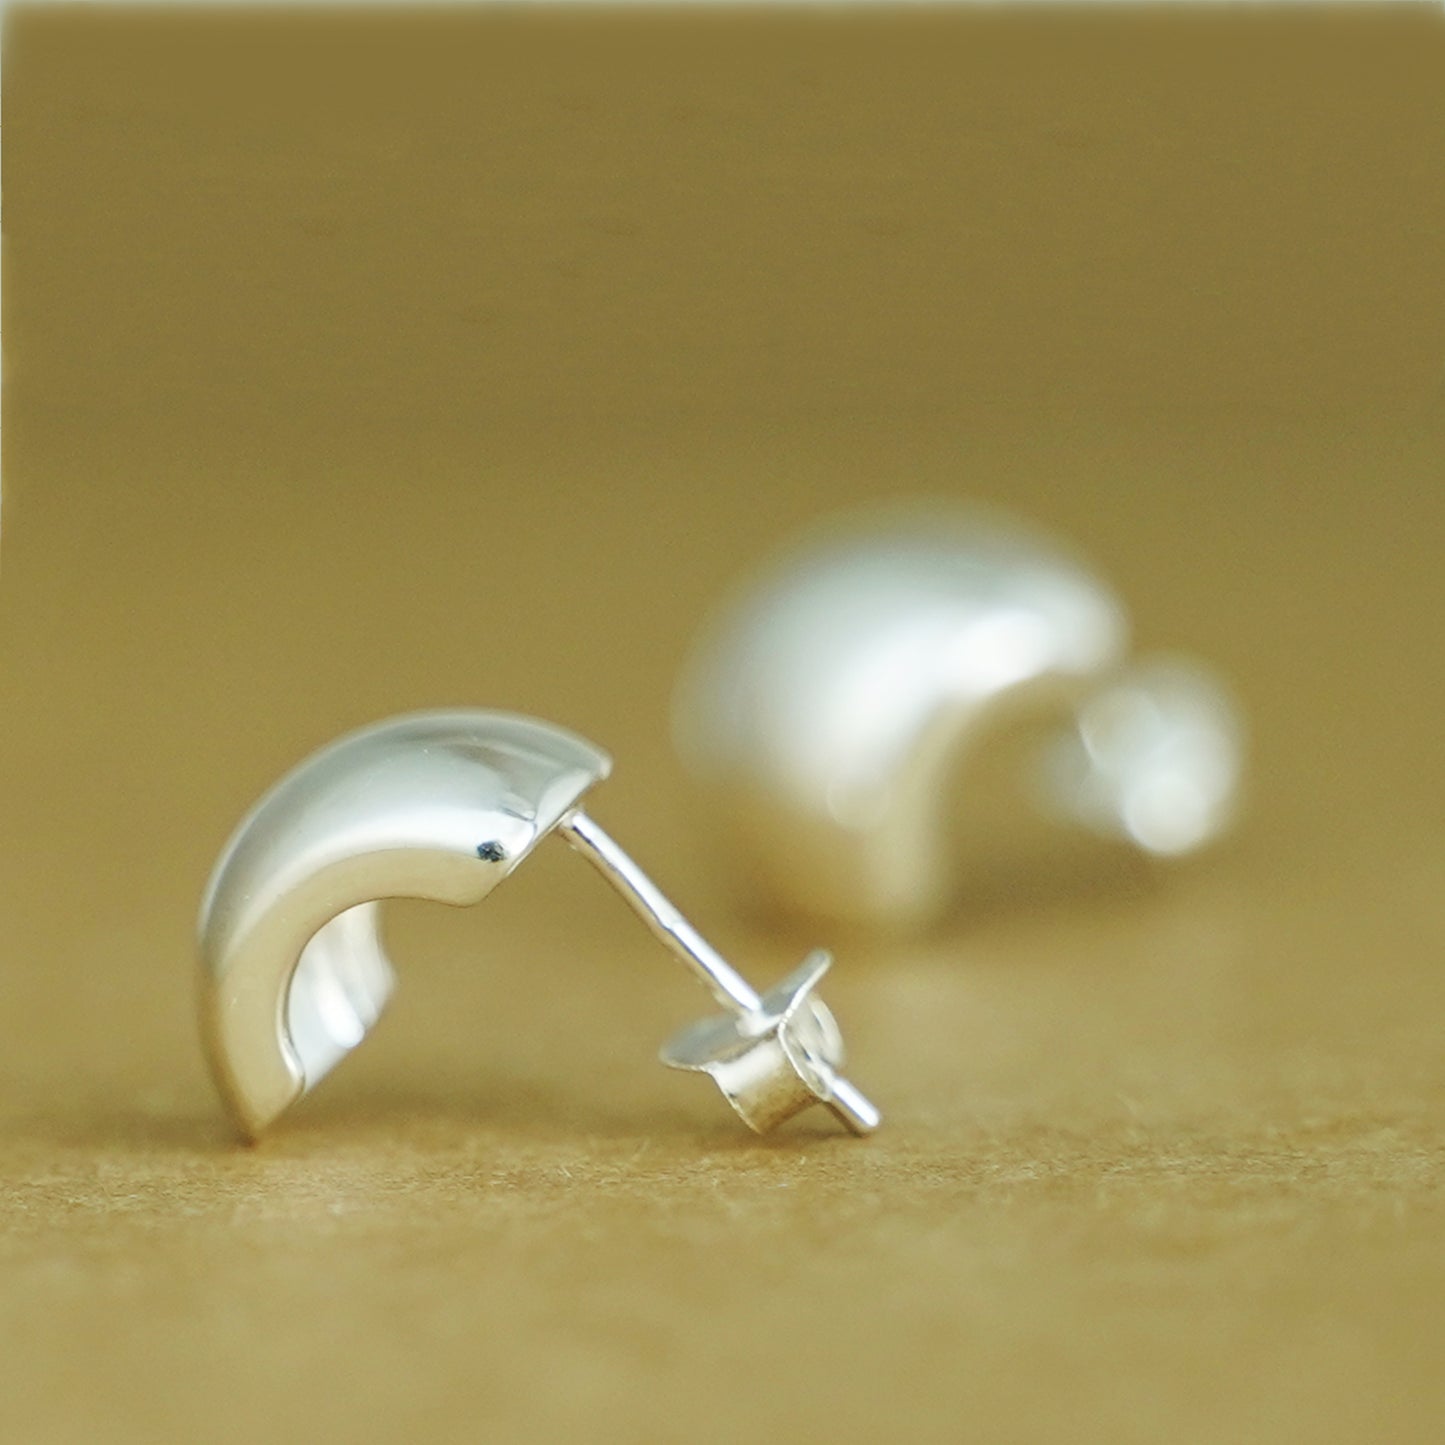 925 Sterling Silver Half Hoop Earrings with Square Drop and Shiny Finish